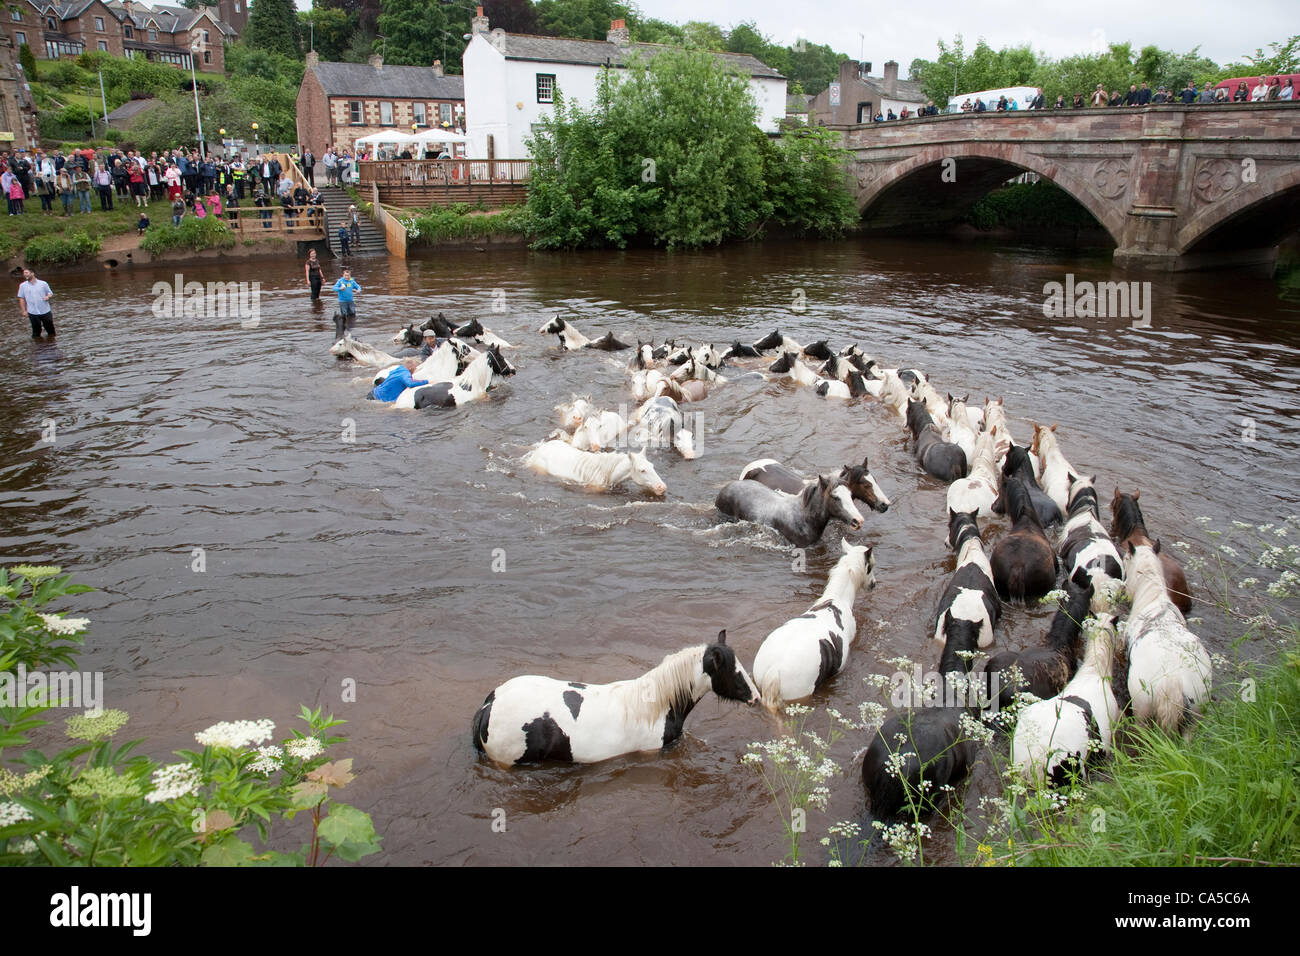 10th June 2012 at Appleby, Cumbria, UK. Horses washing in the river Eden. Sunday is traditionally a busy day for horse trading and visitor attendance at the Appleby Fair, the biggest annual gathering of Gypsies and Travellers in Europe. Stock Photo